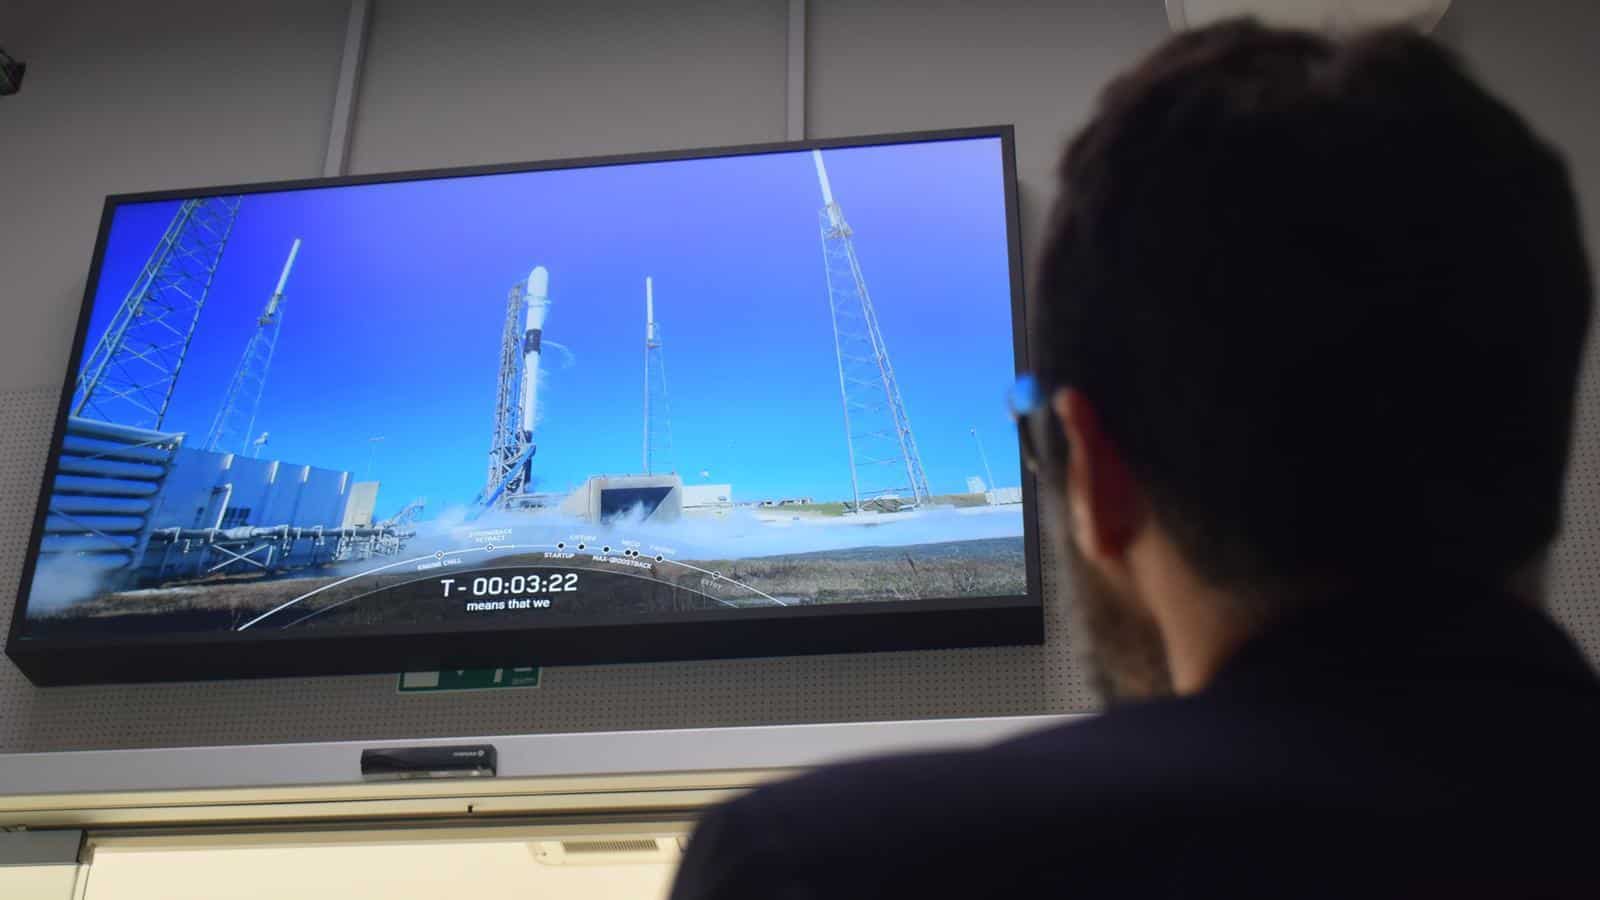 The Generalitat of Catalonia promotes the launch of the fourth satellite into space